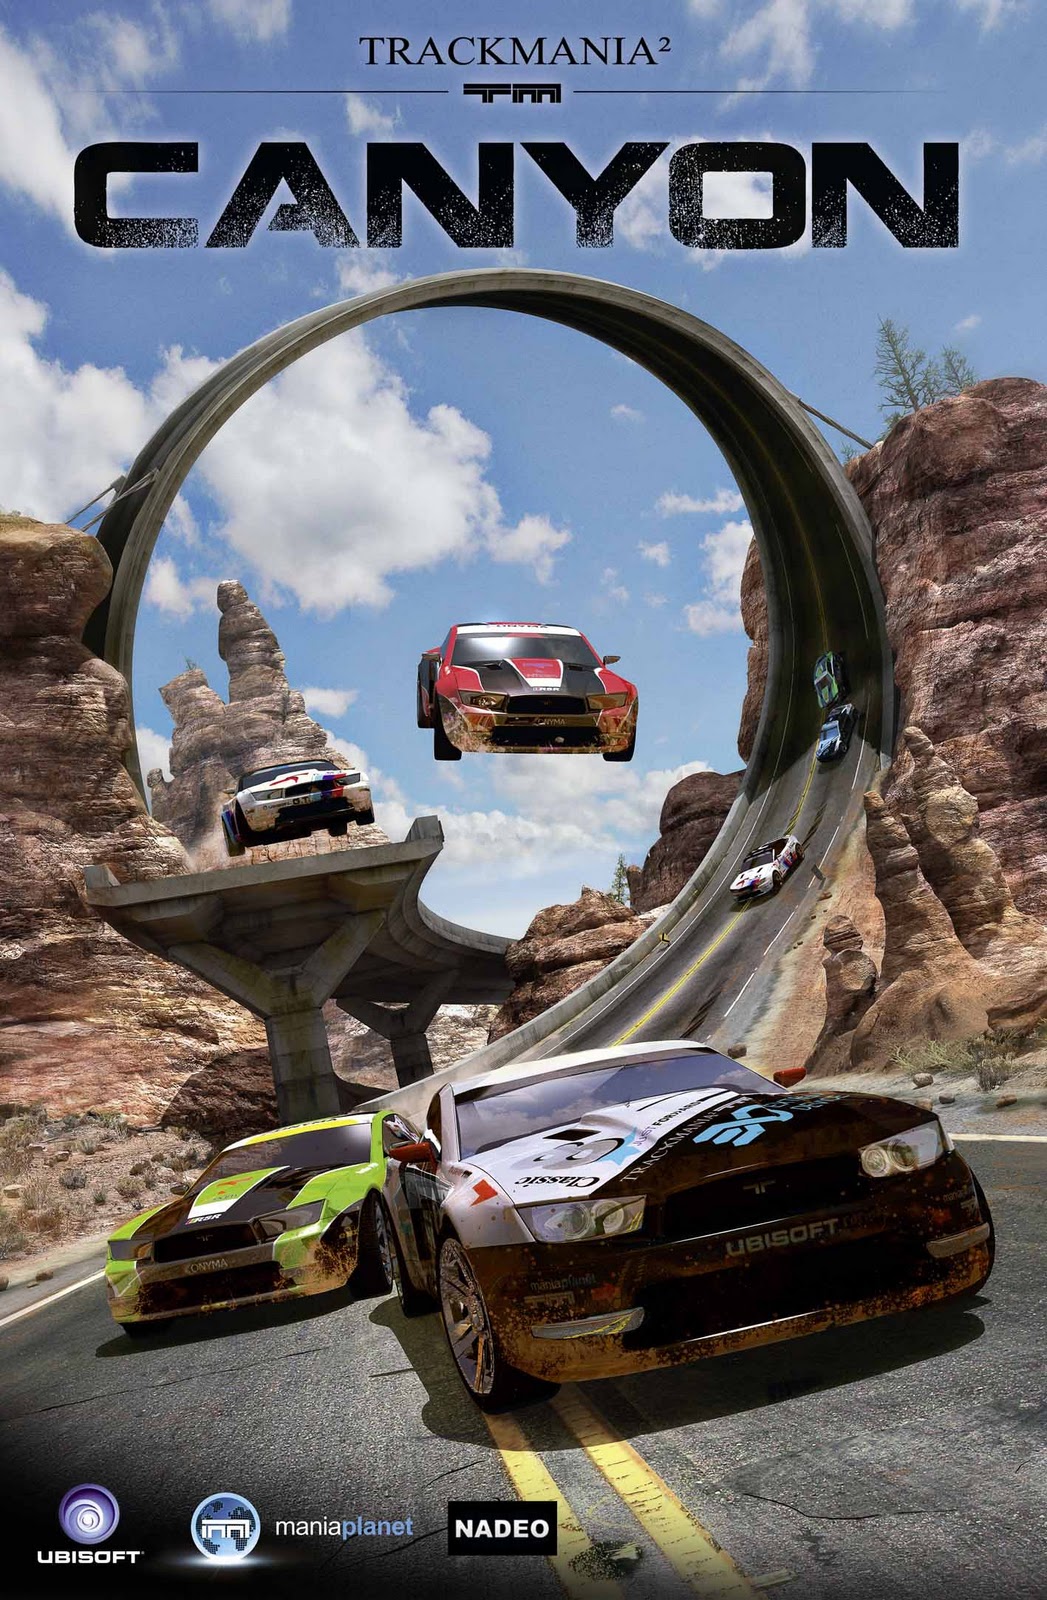 trackmania 2 canyon crack download